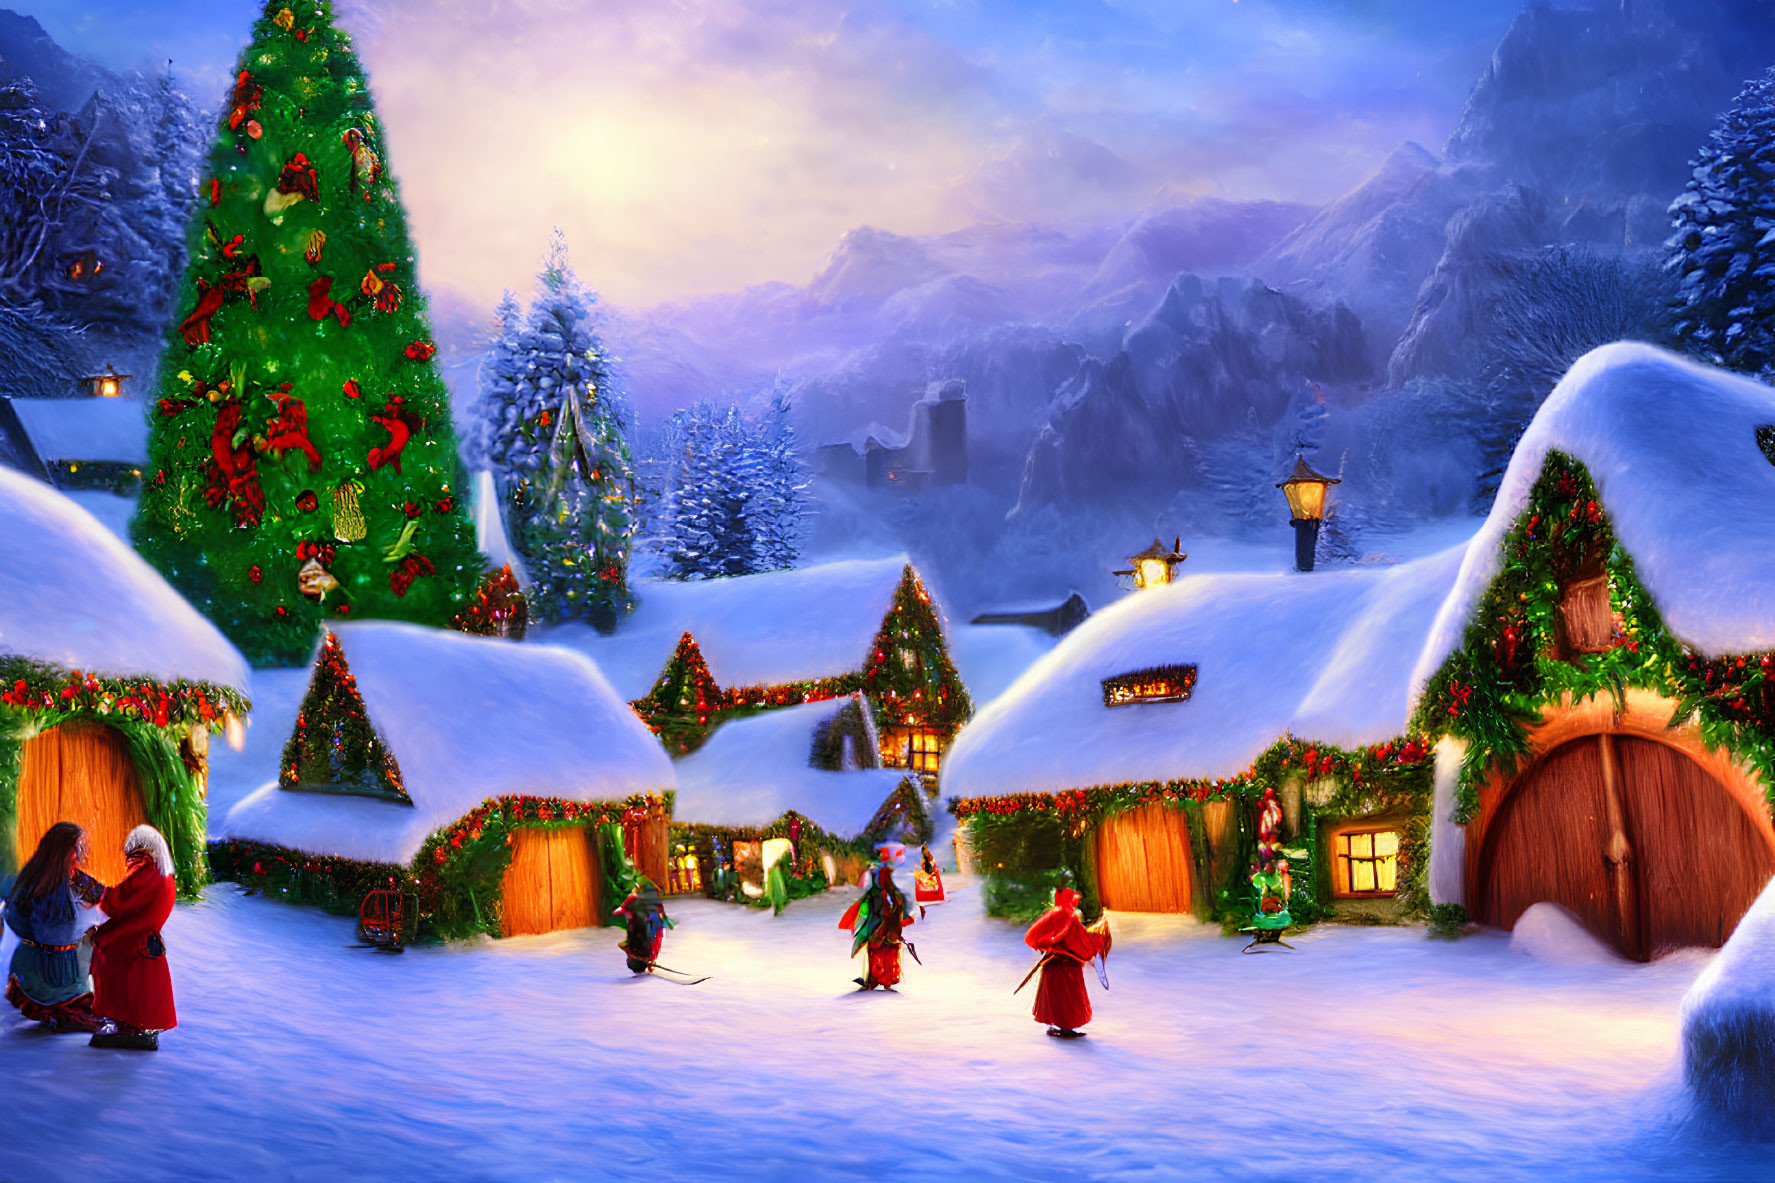 Snow-covered village with Christmas decorations and Victorian attire at dusk